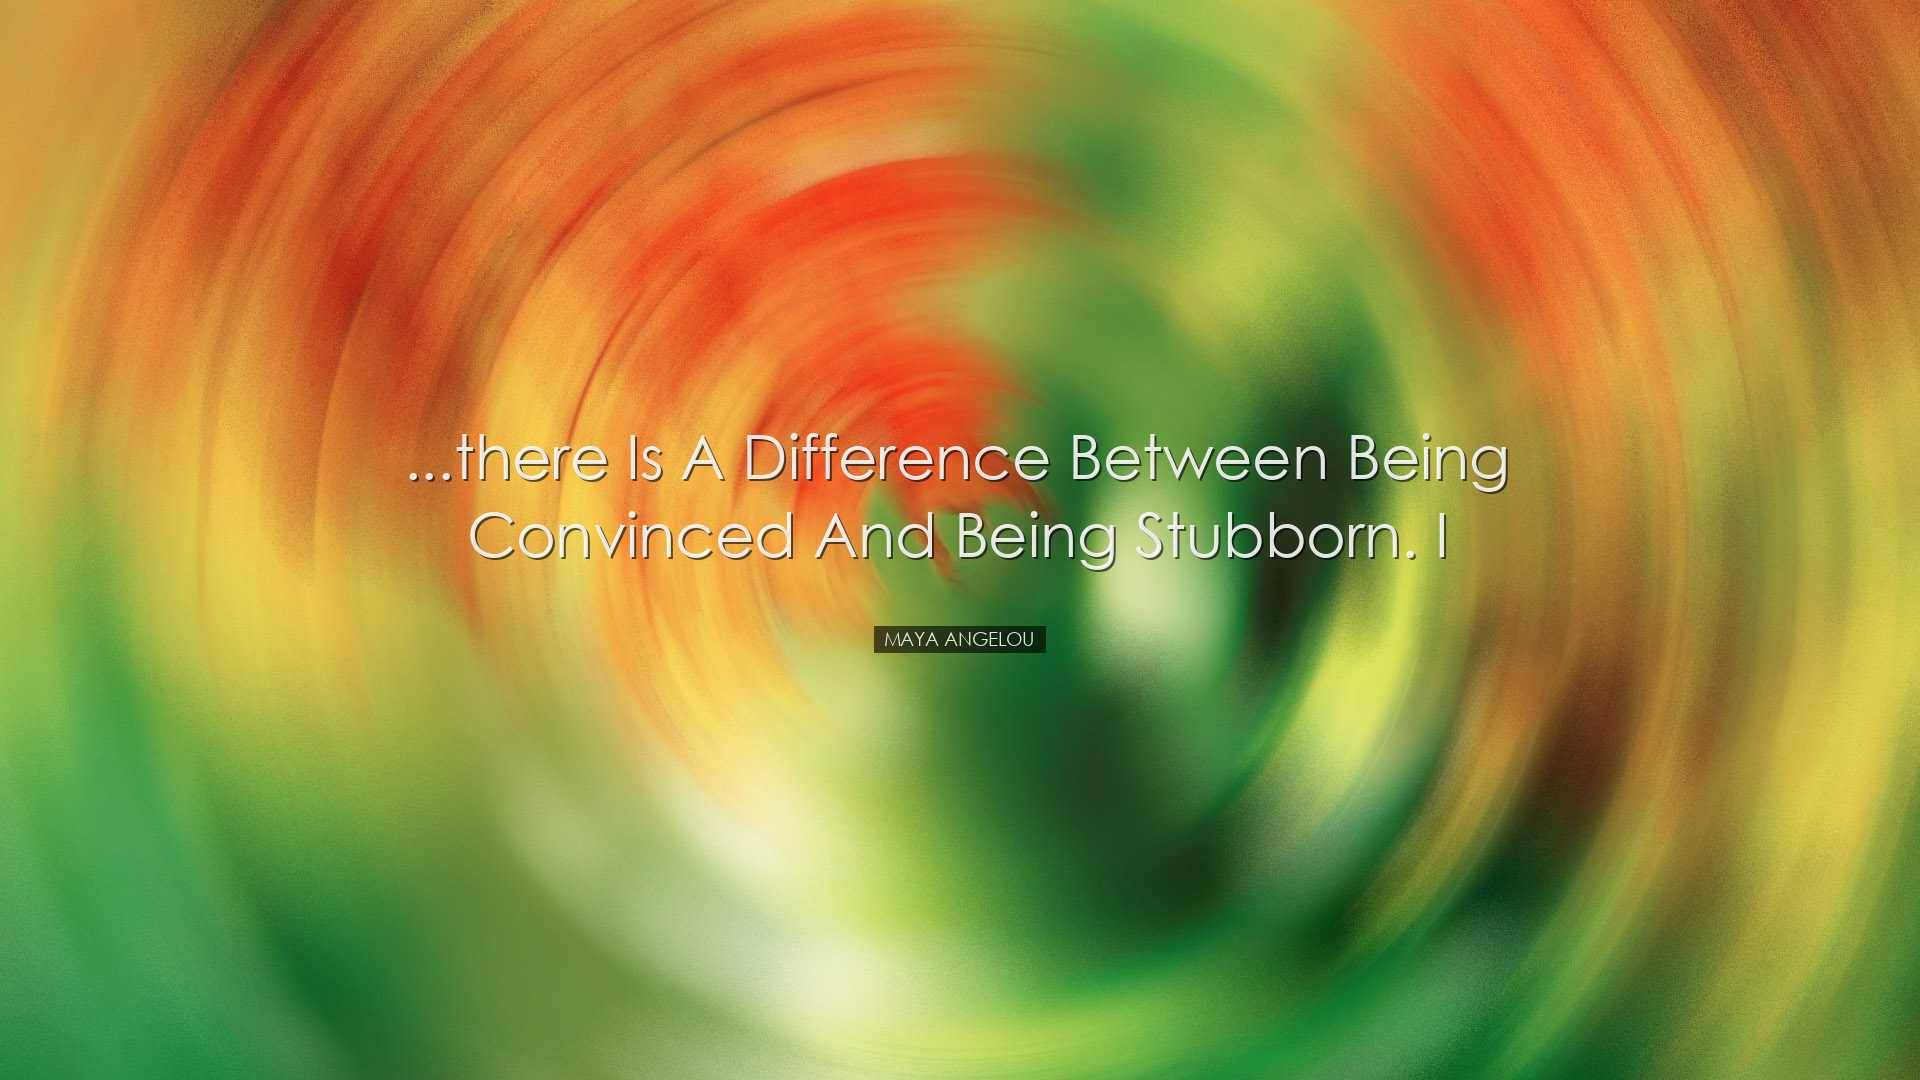 ...there is a difference between being convinced and being stubbor